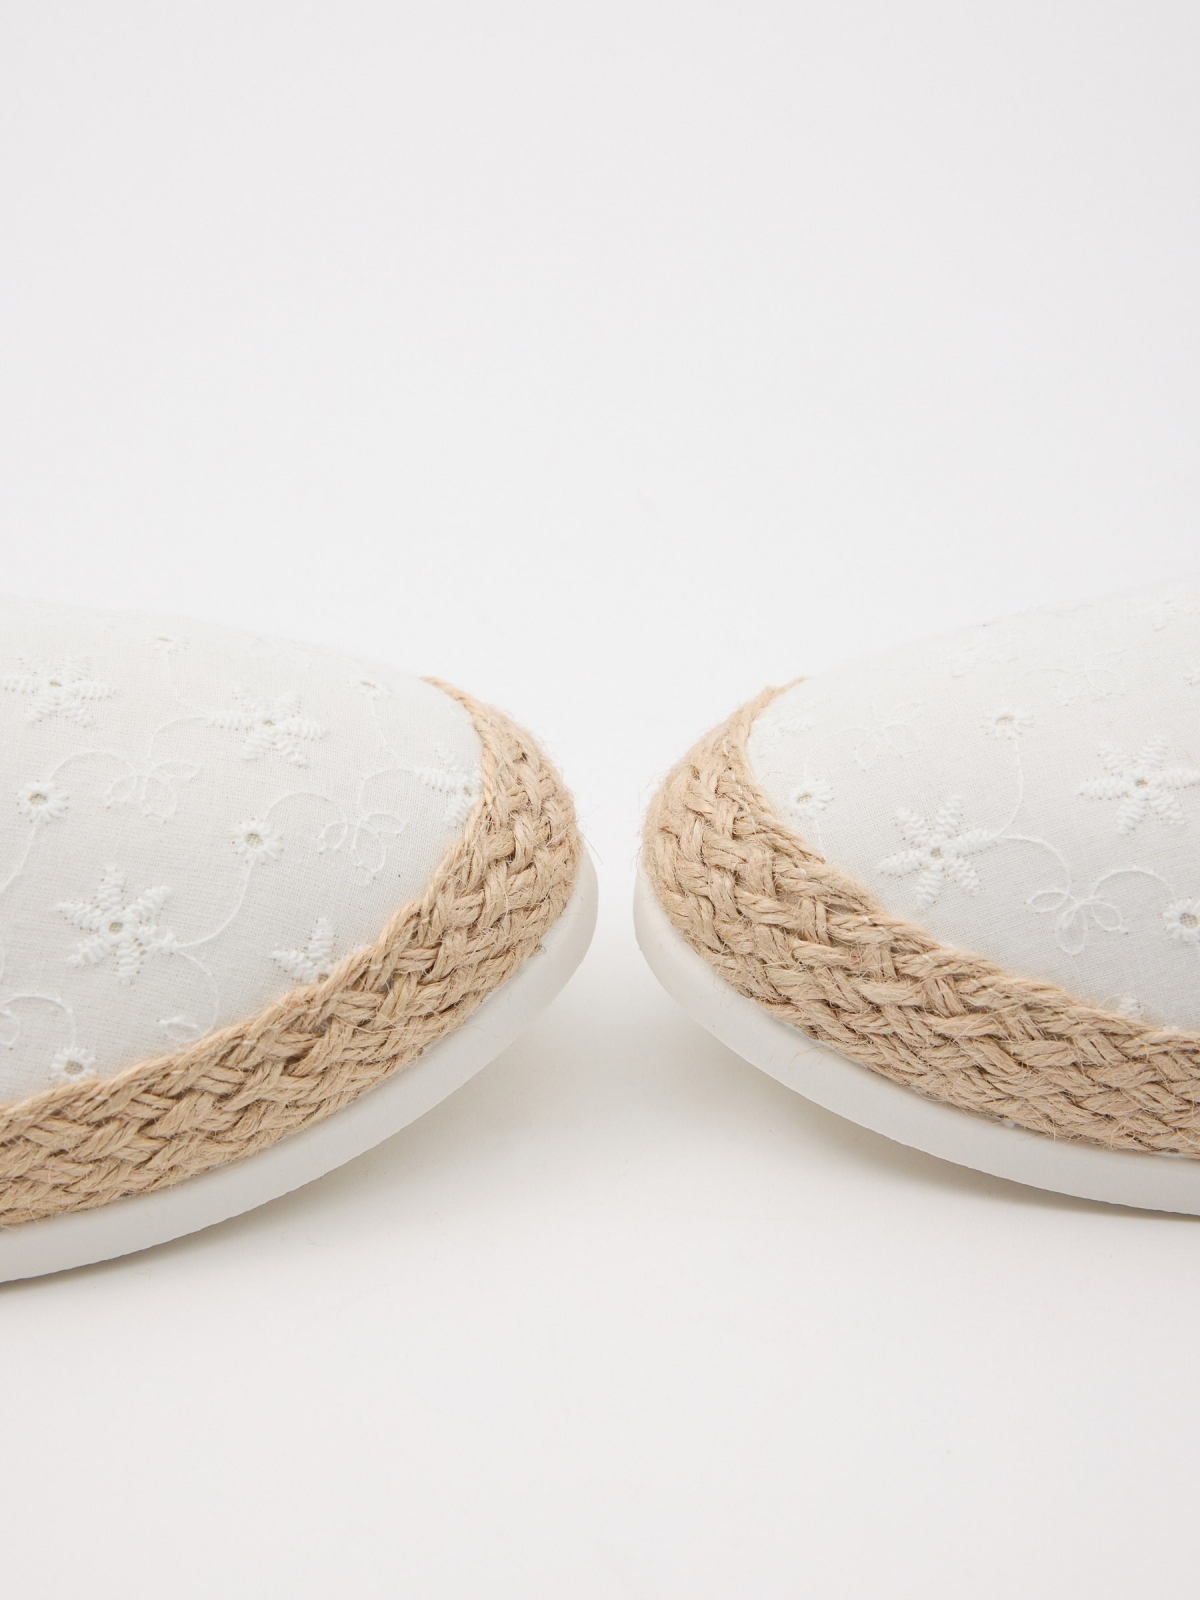 Casual embroidered espadrilles white detail view